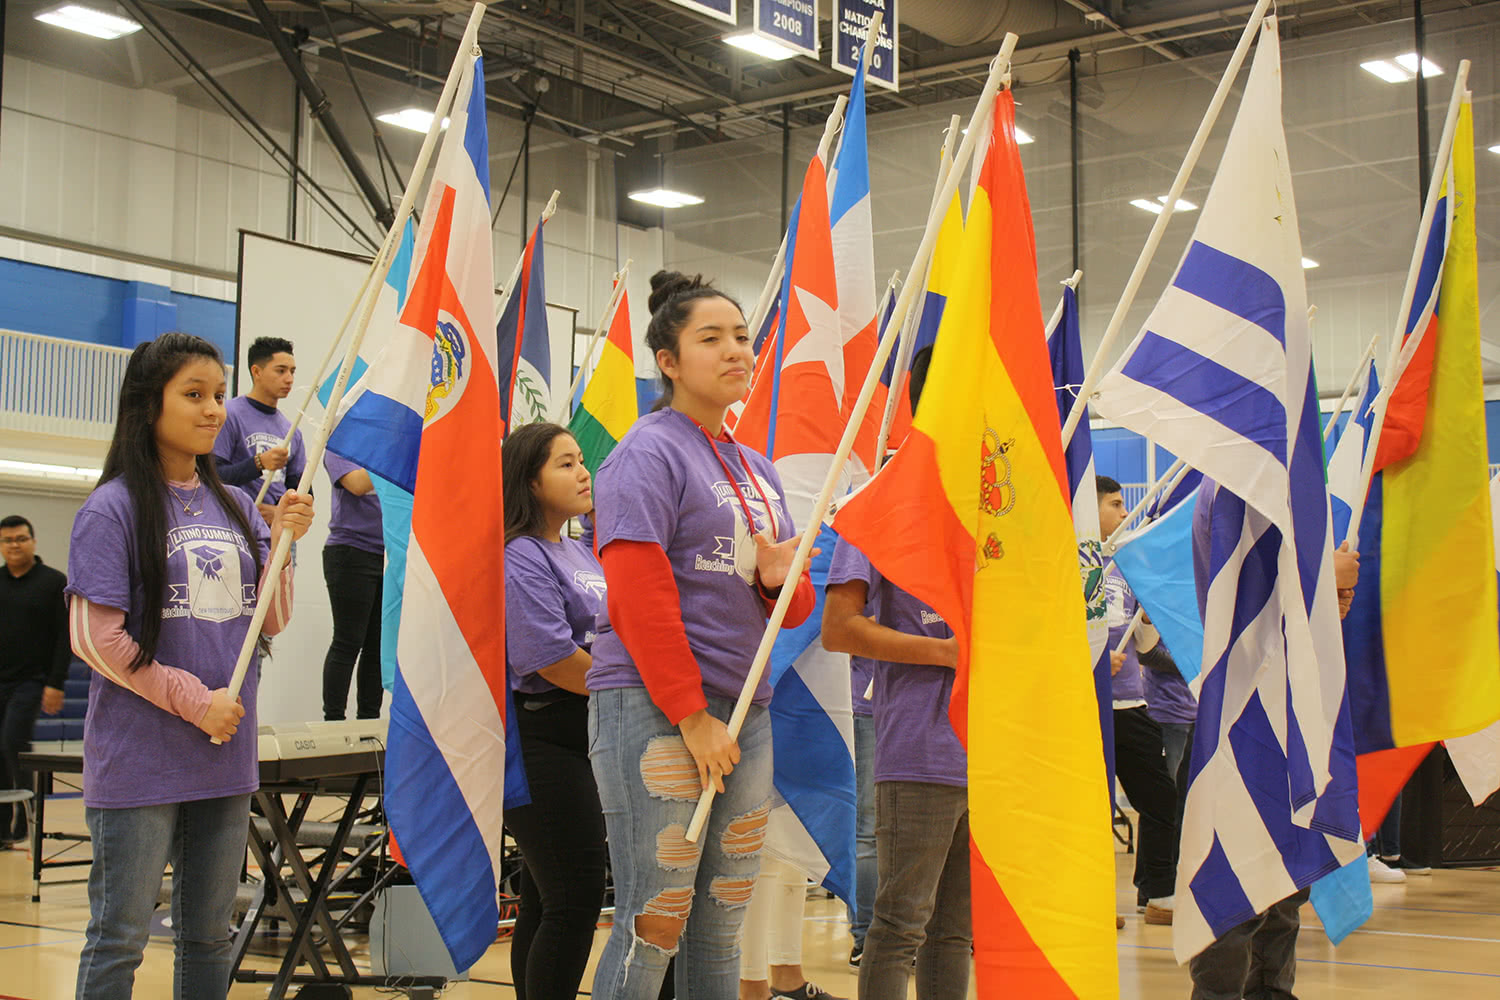 Students carry flags during 19th annual Latino Summit's flag ceremony